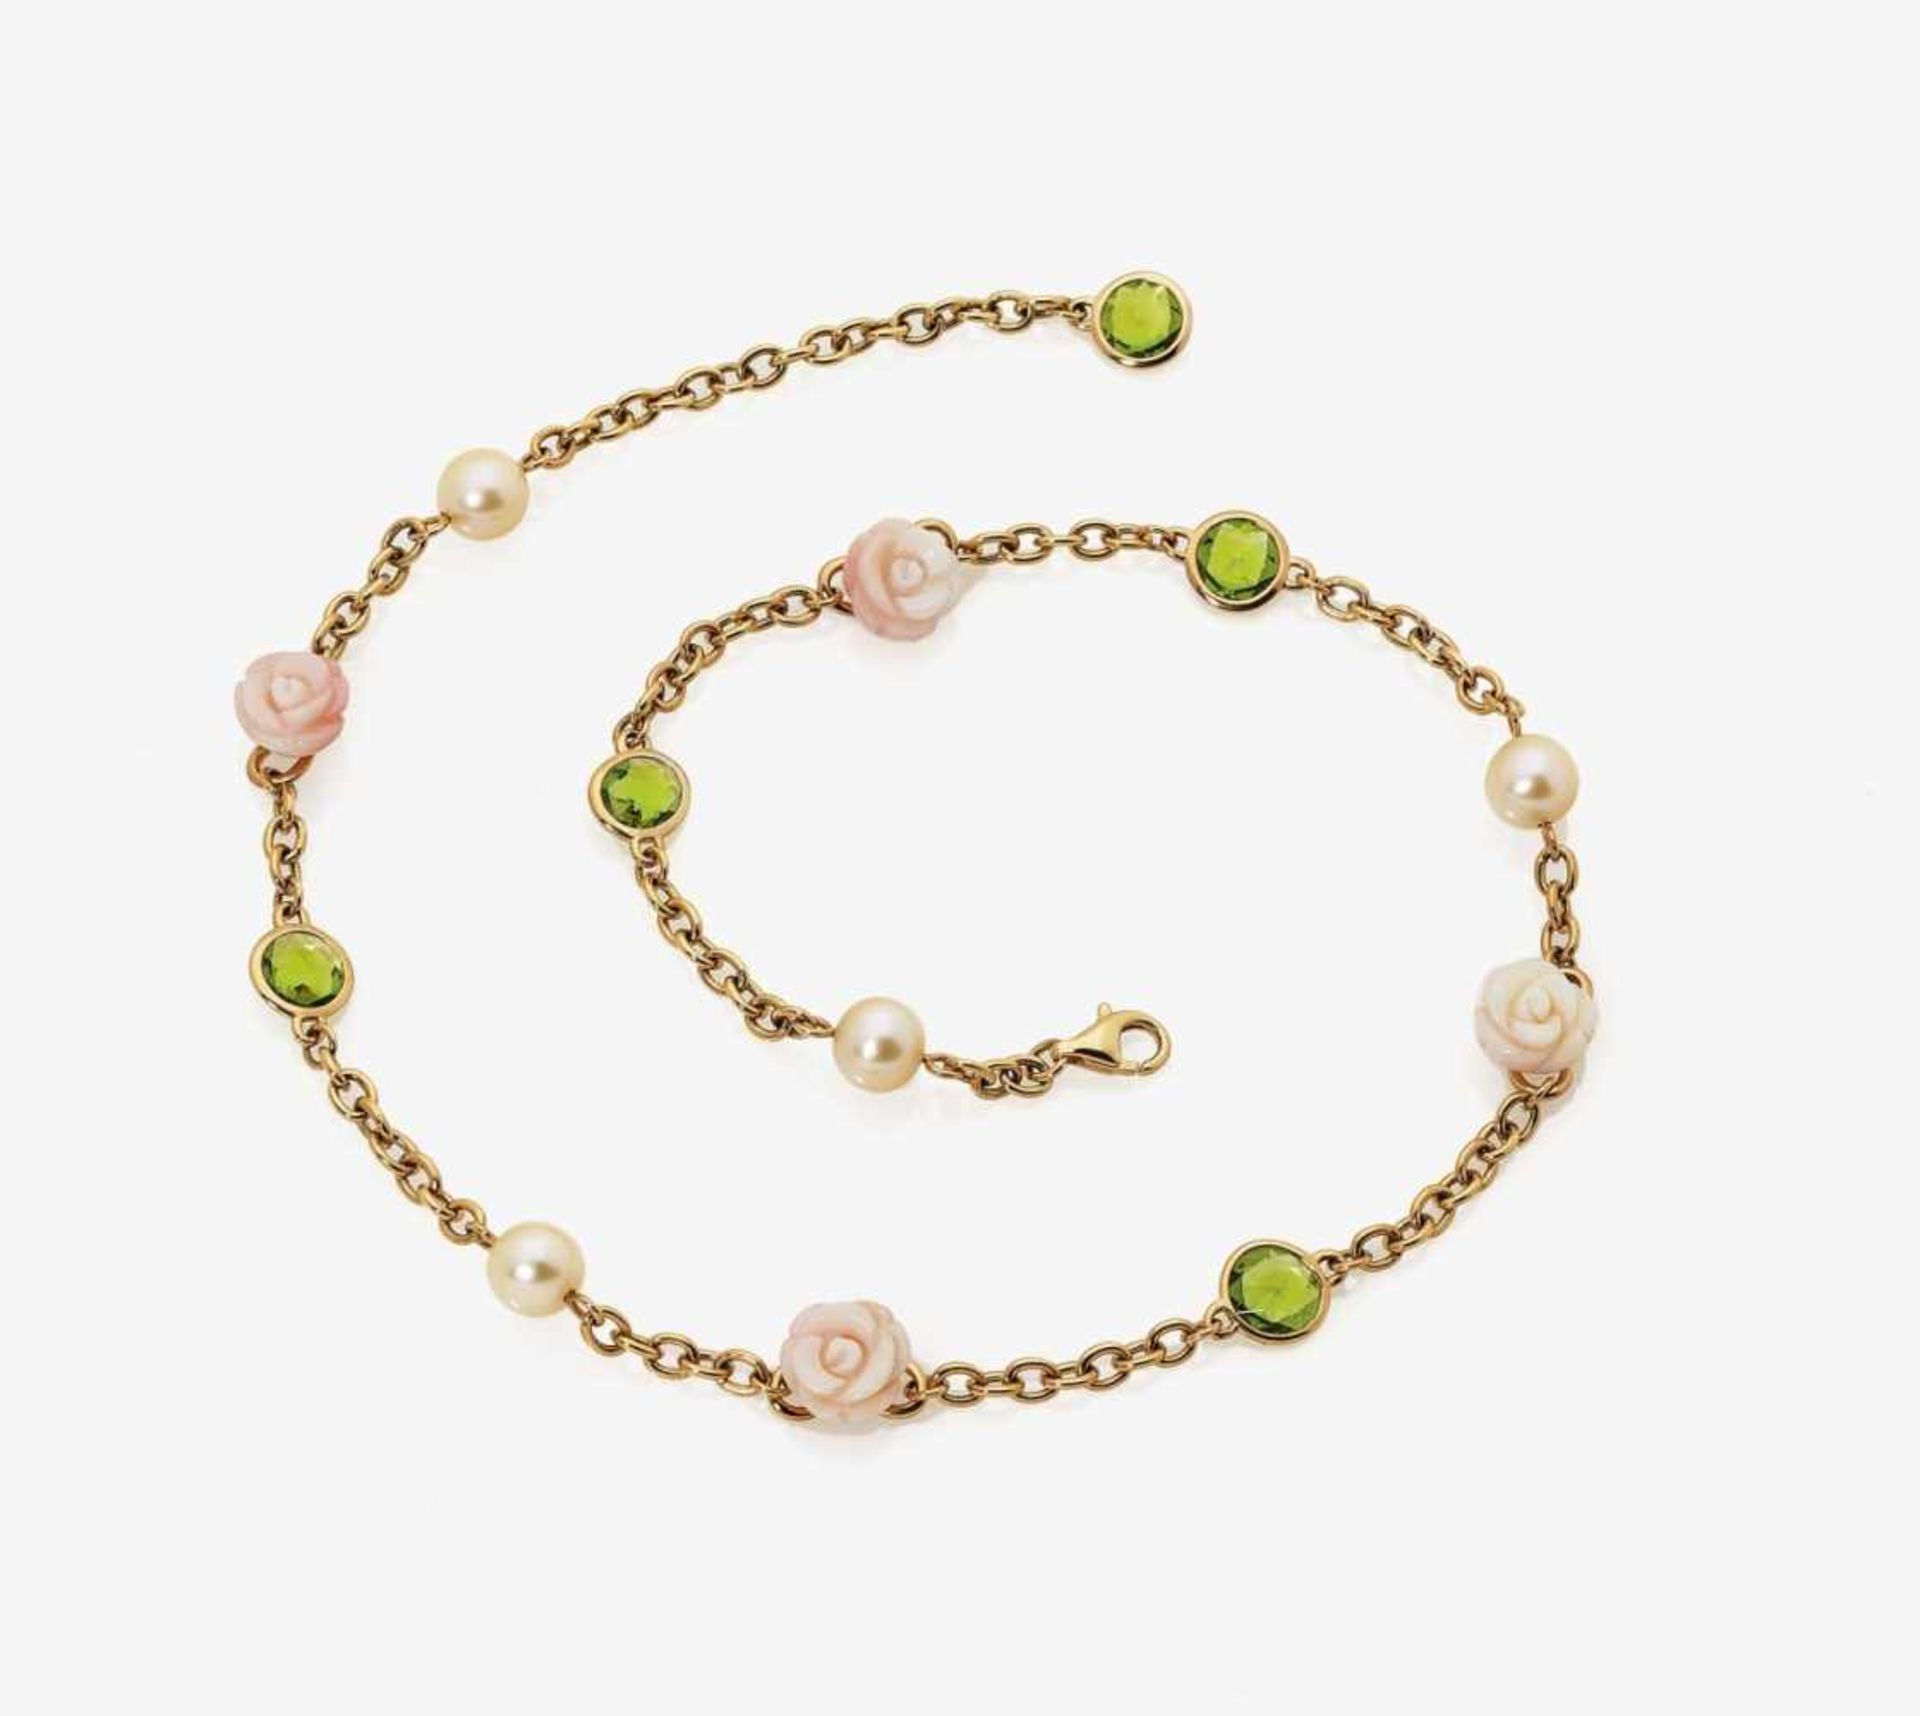 A Peridot, Coral and Cultured-Pearl NecklaceMIMI 18K rose gold (750/-), stamped. Signed Mimi. 5